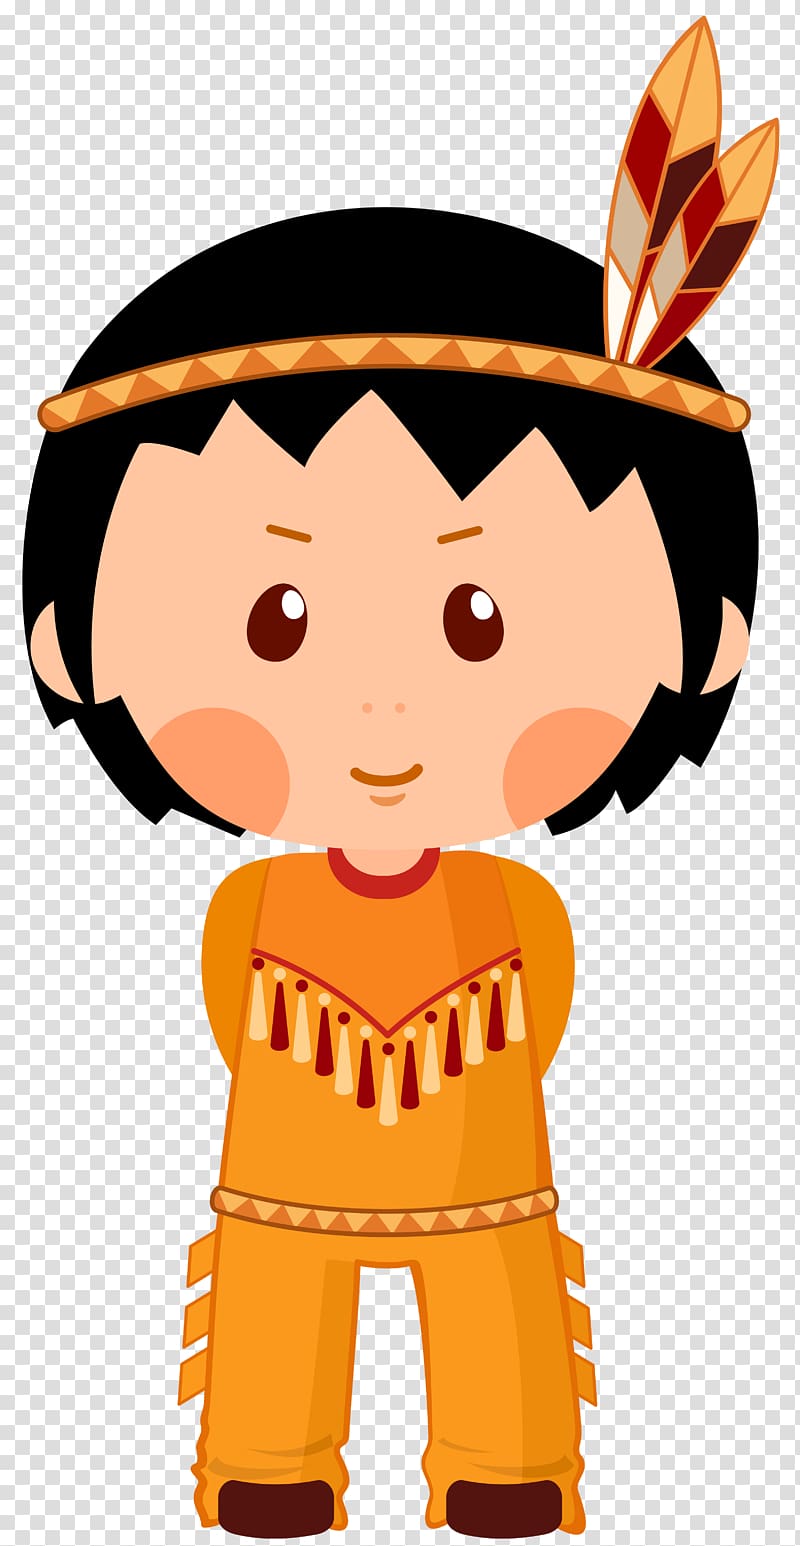 native american baby clipart